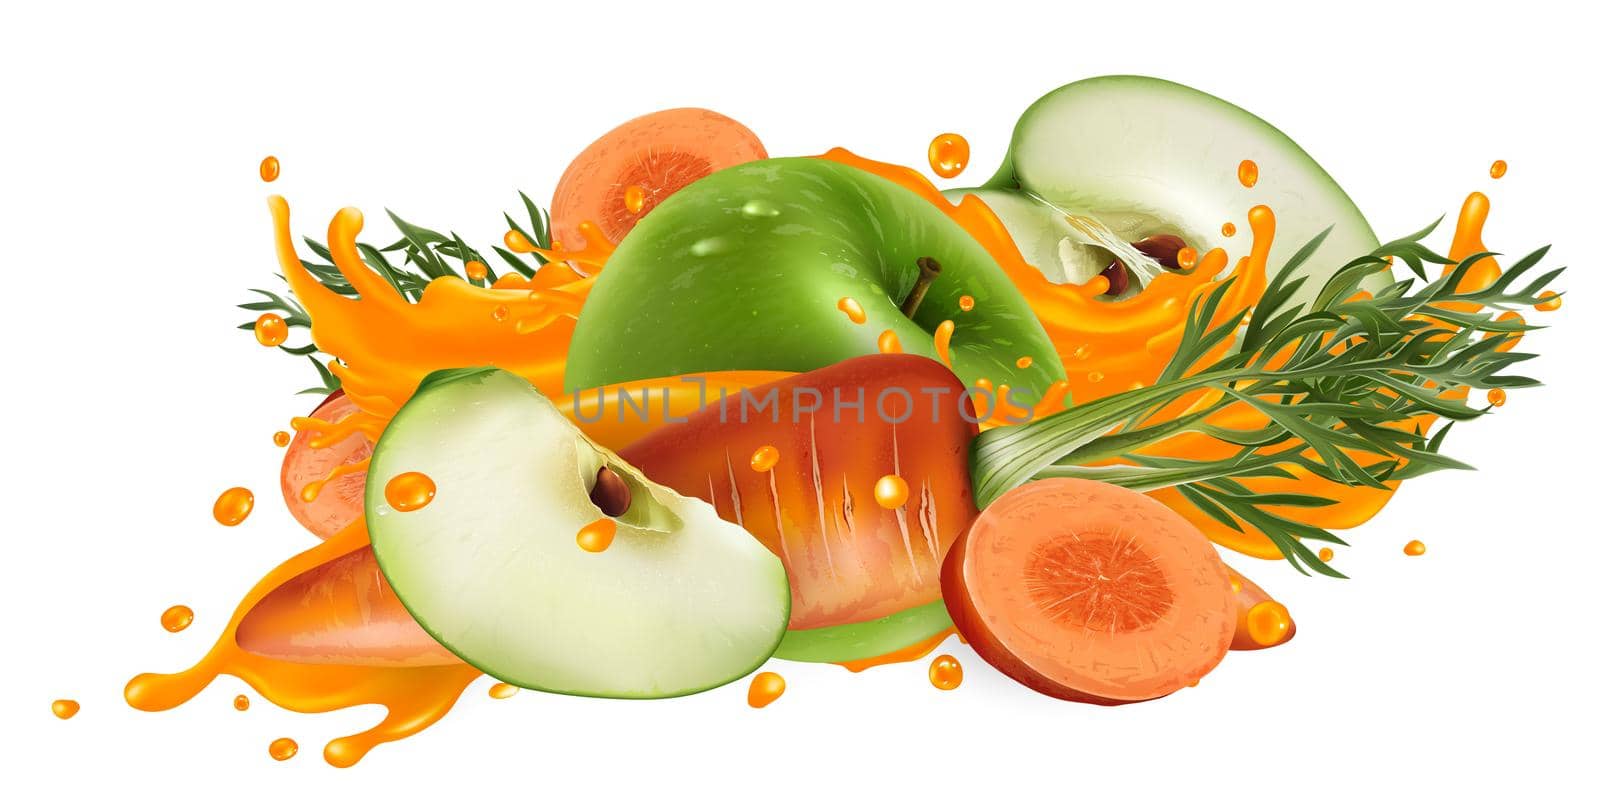 Green apples and carrots in a vegetable juice splash. by ConceptCafe